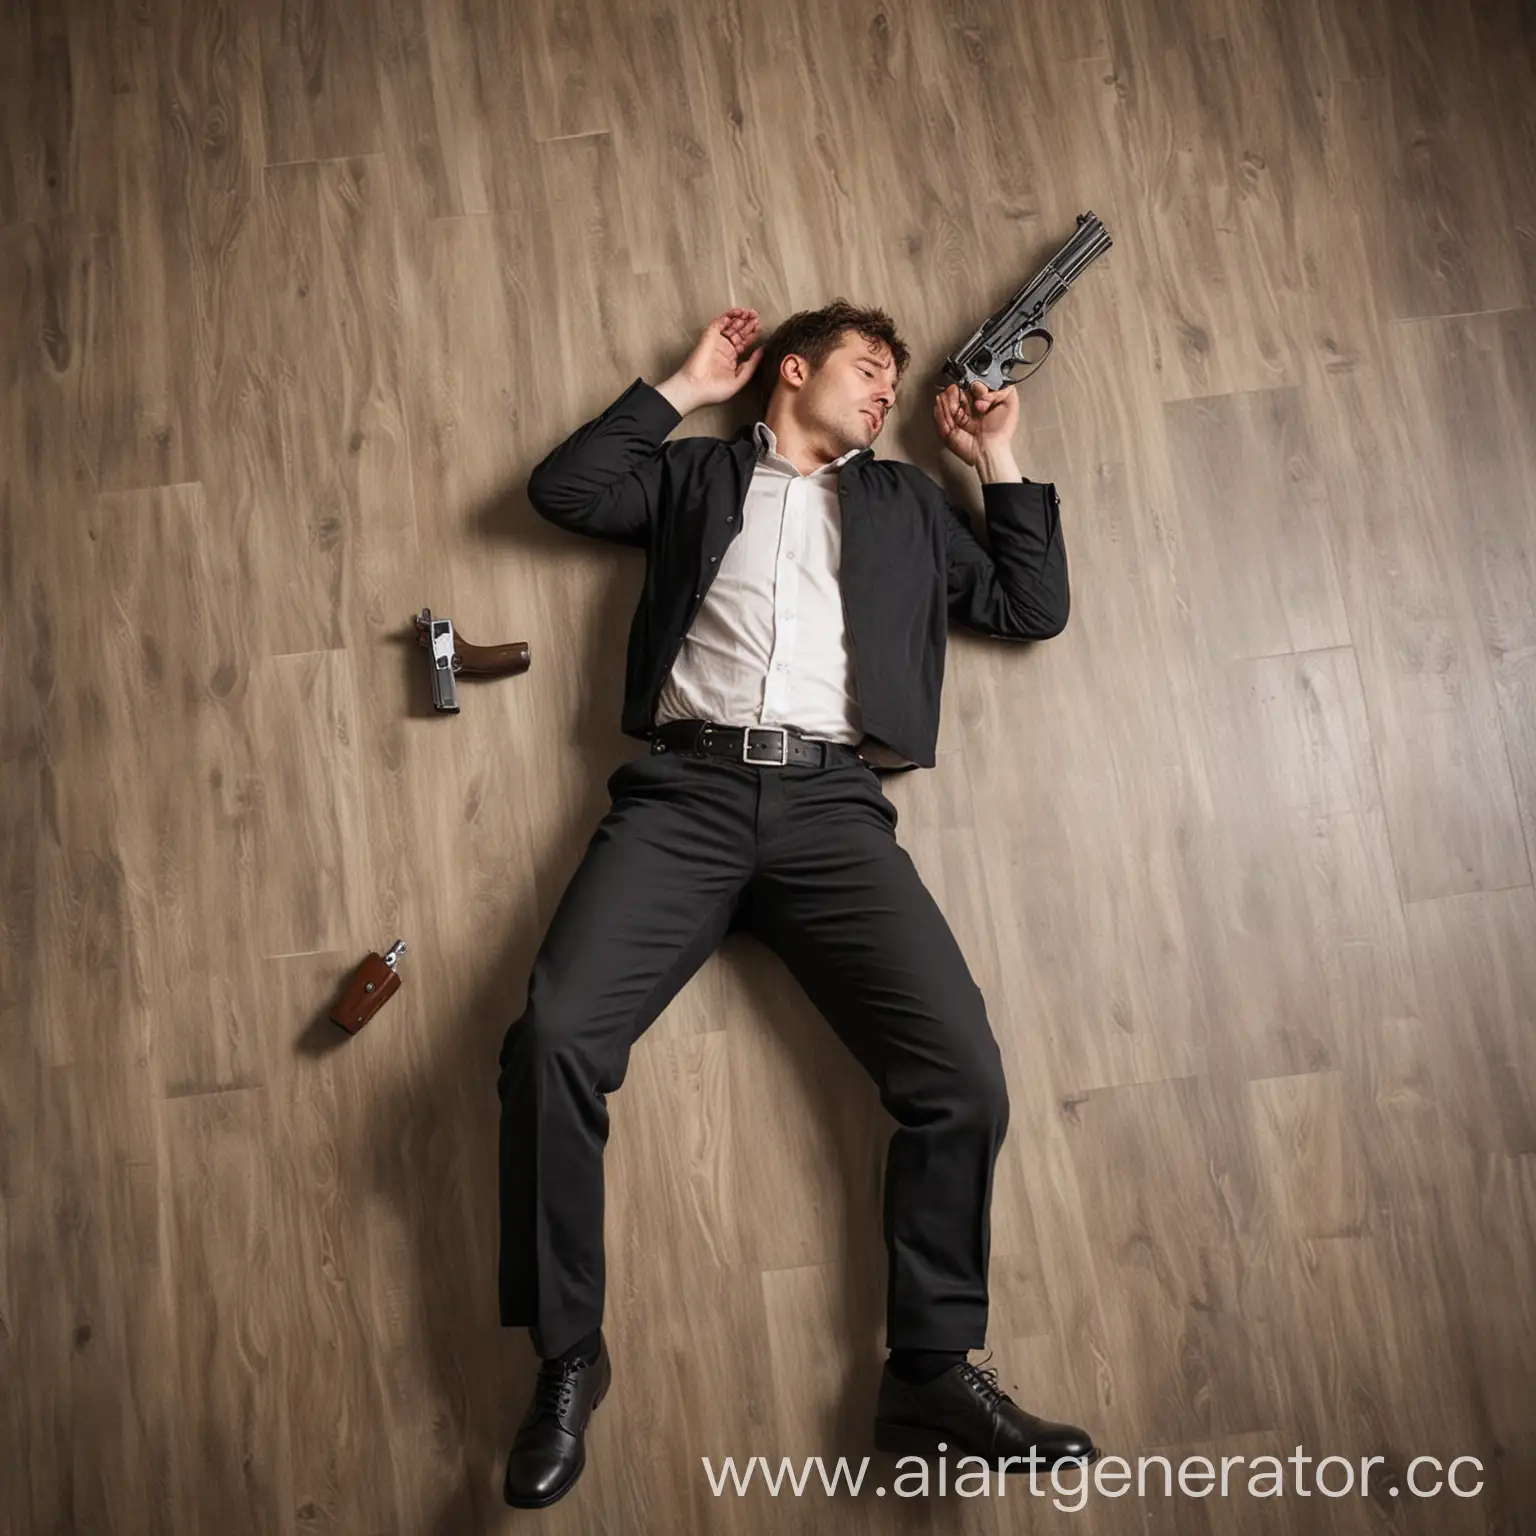 Man-Lying-on-Floor-with-Pistol-at-His-Waist